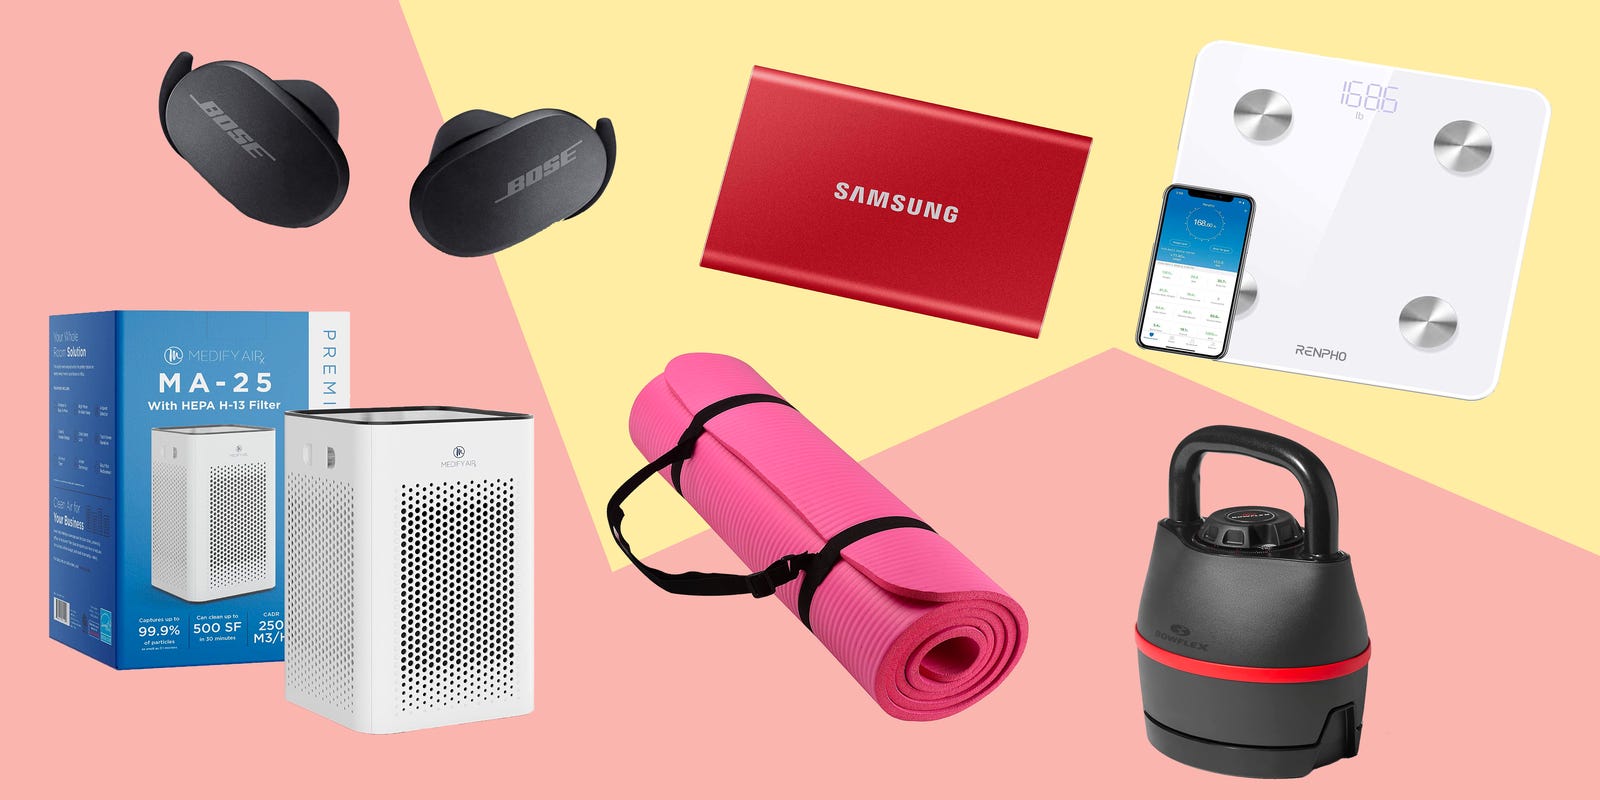 Updated daily: Here are the 10 best Amazon deals today in January 2022